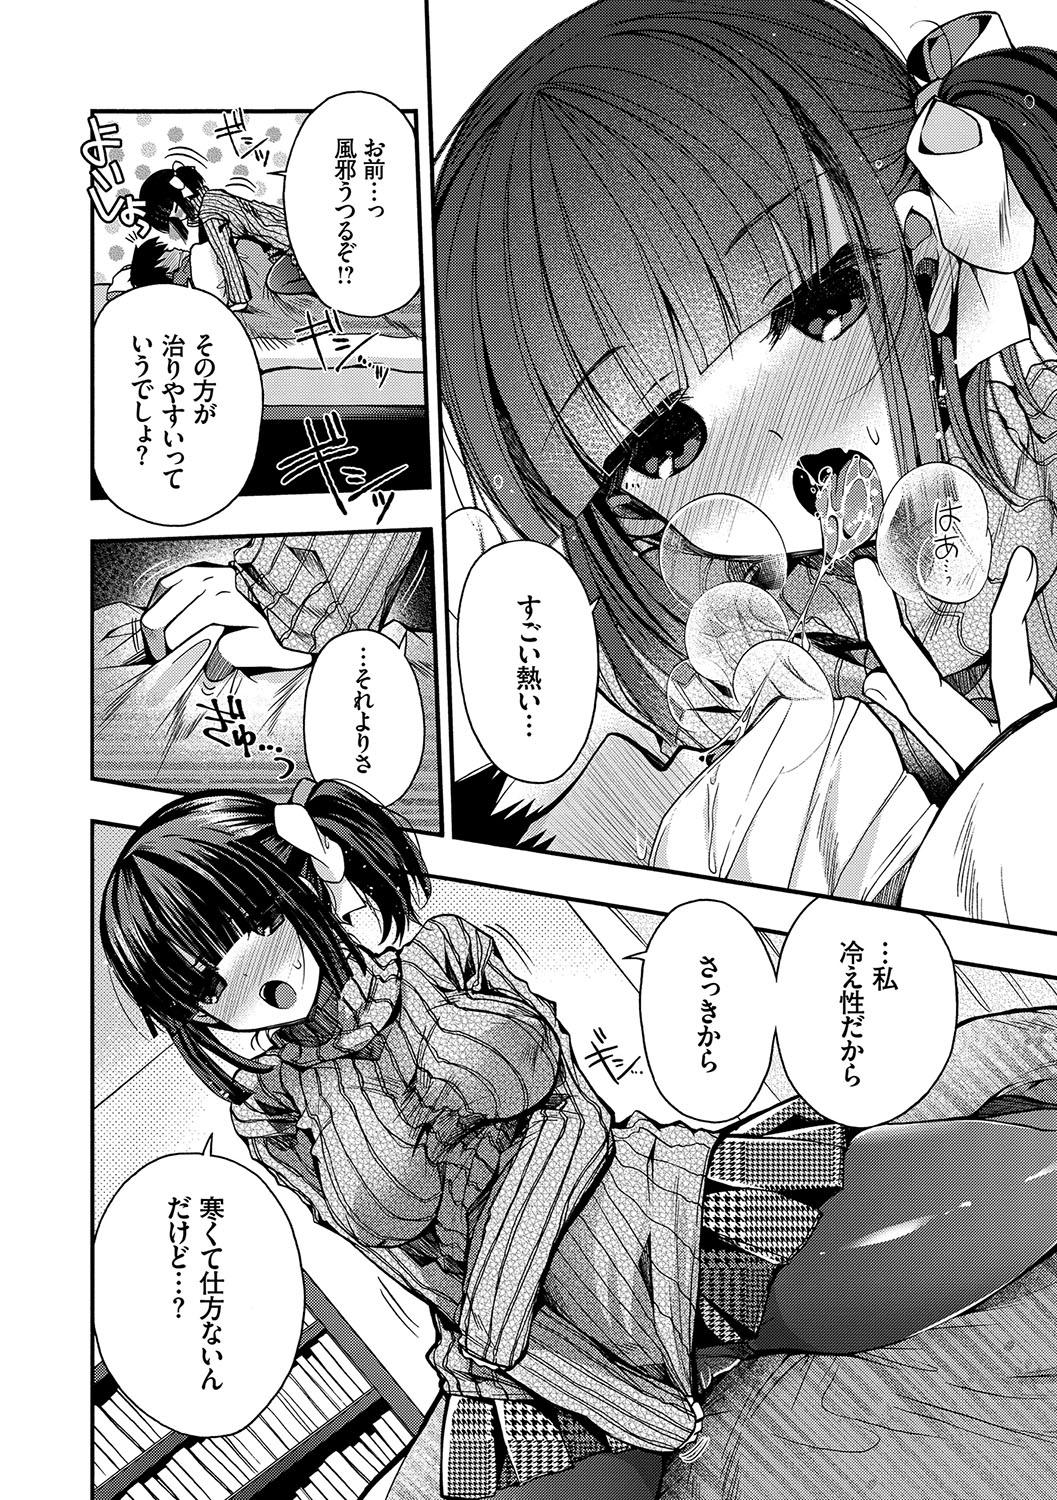 Hatsukoi Melty - Melty First Love 160